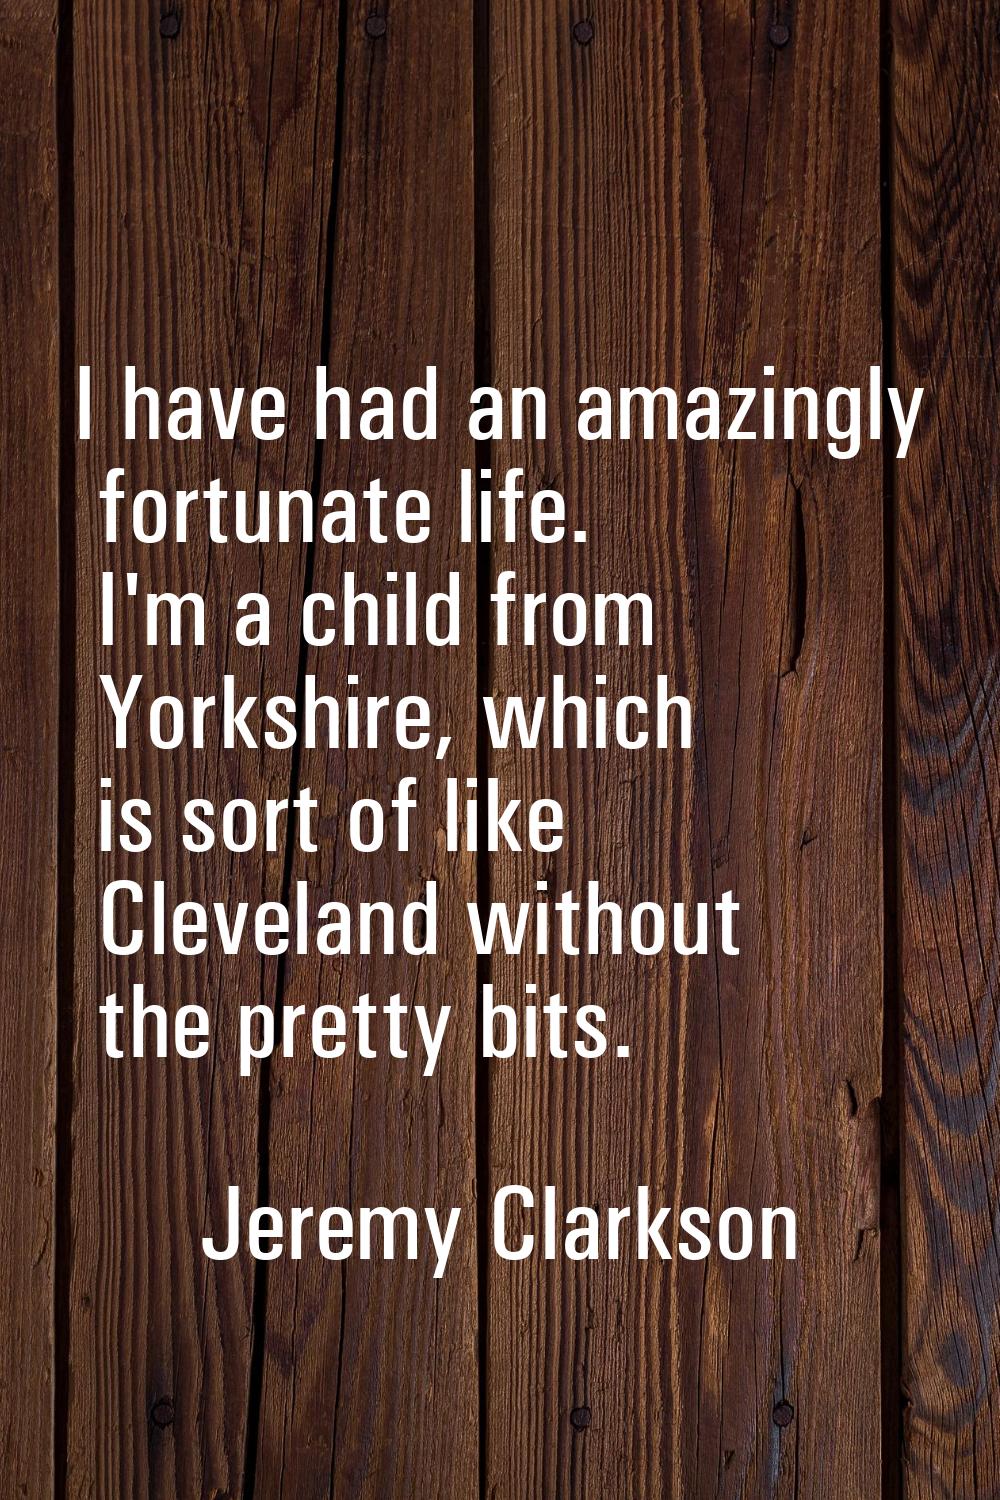 I have had an amazingly fortunate life. I'm a child from Yorkshire, which is sort of like Cleveland